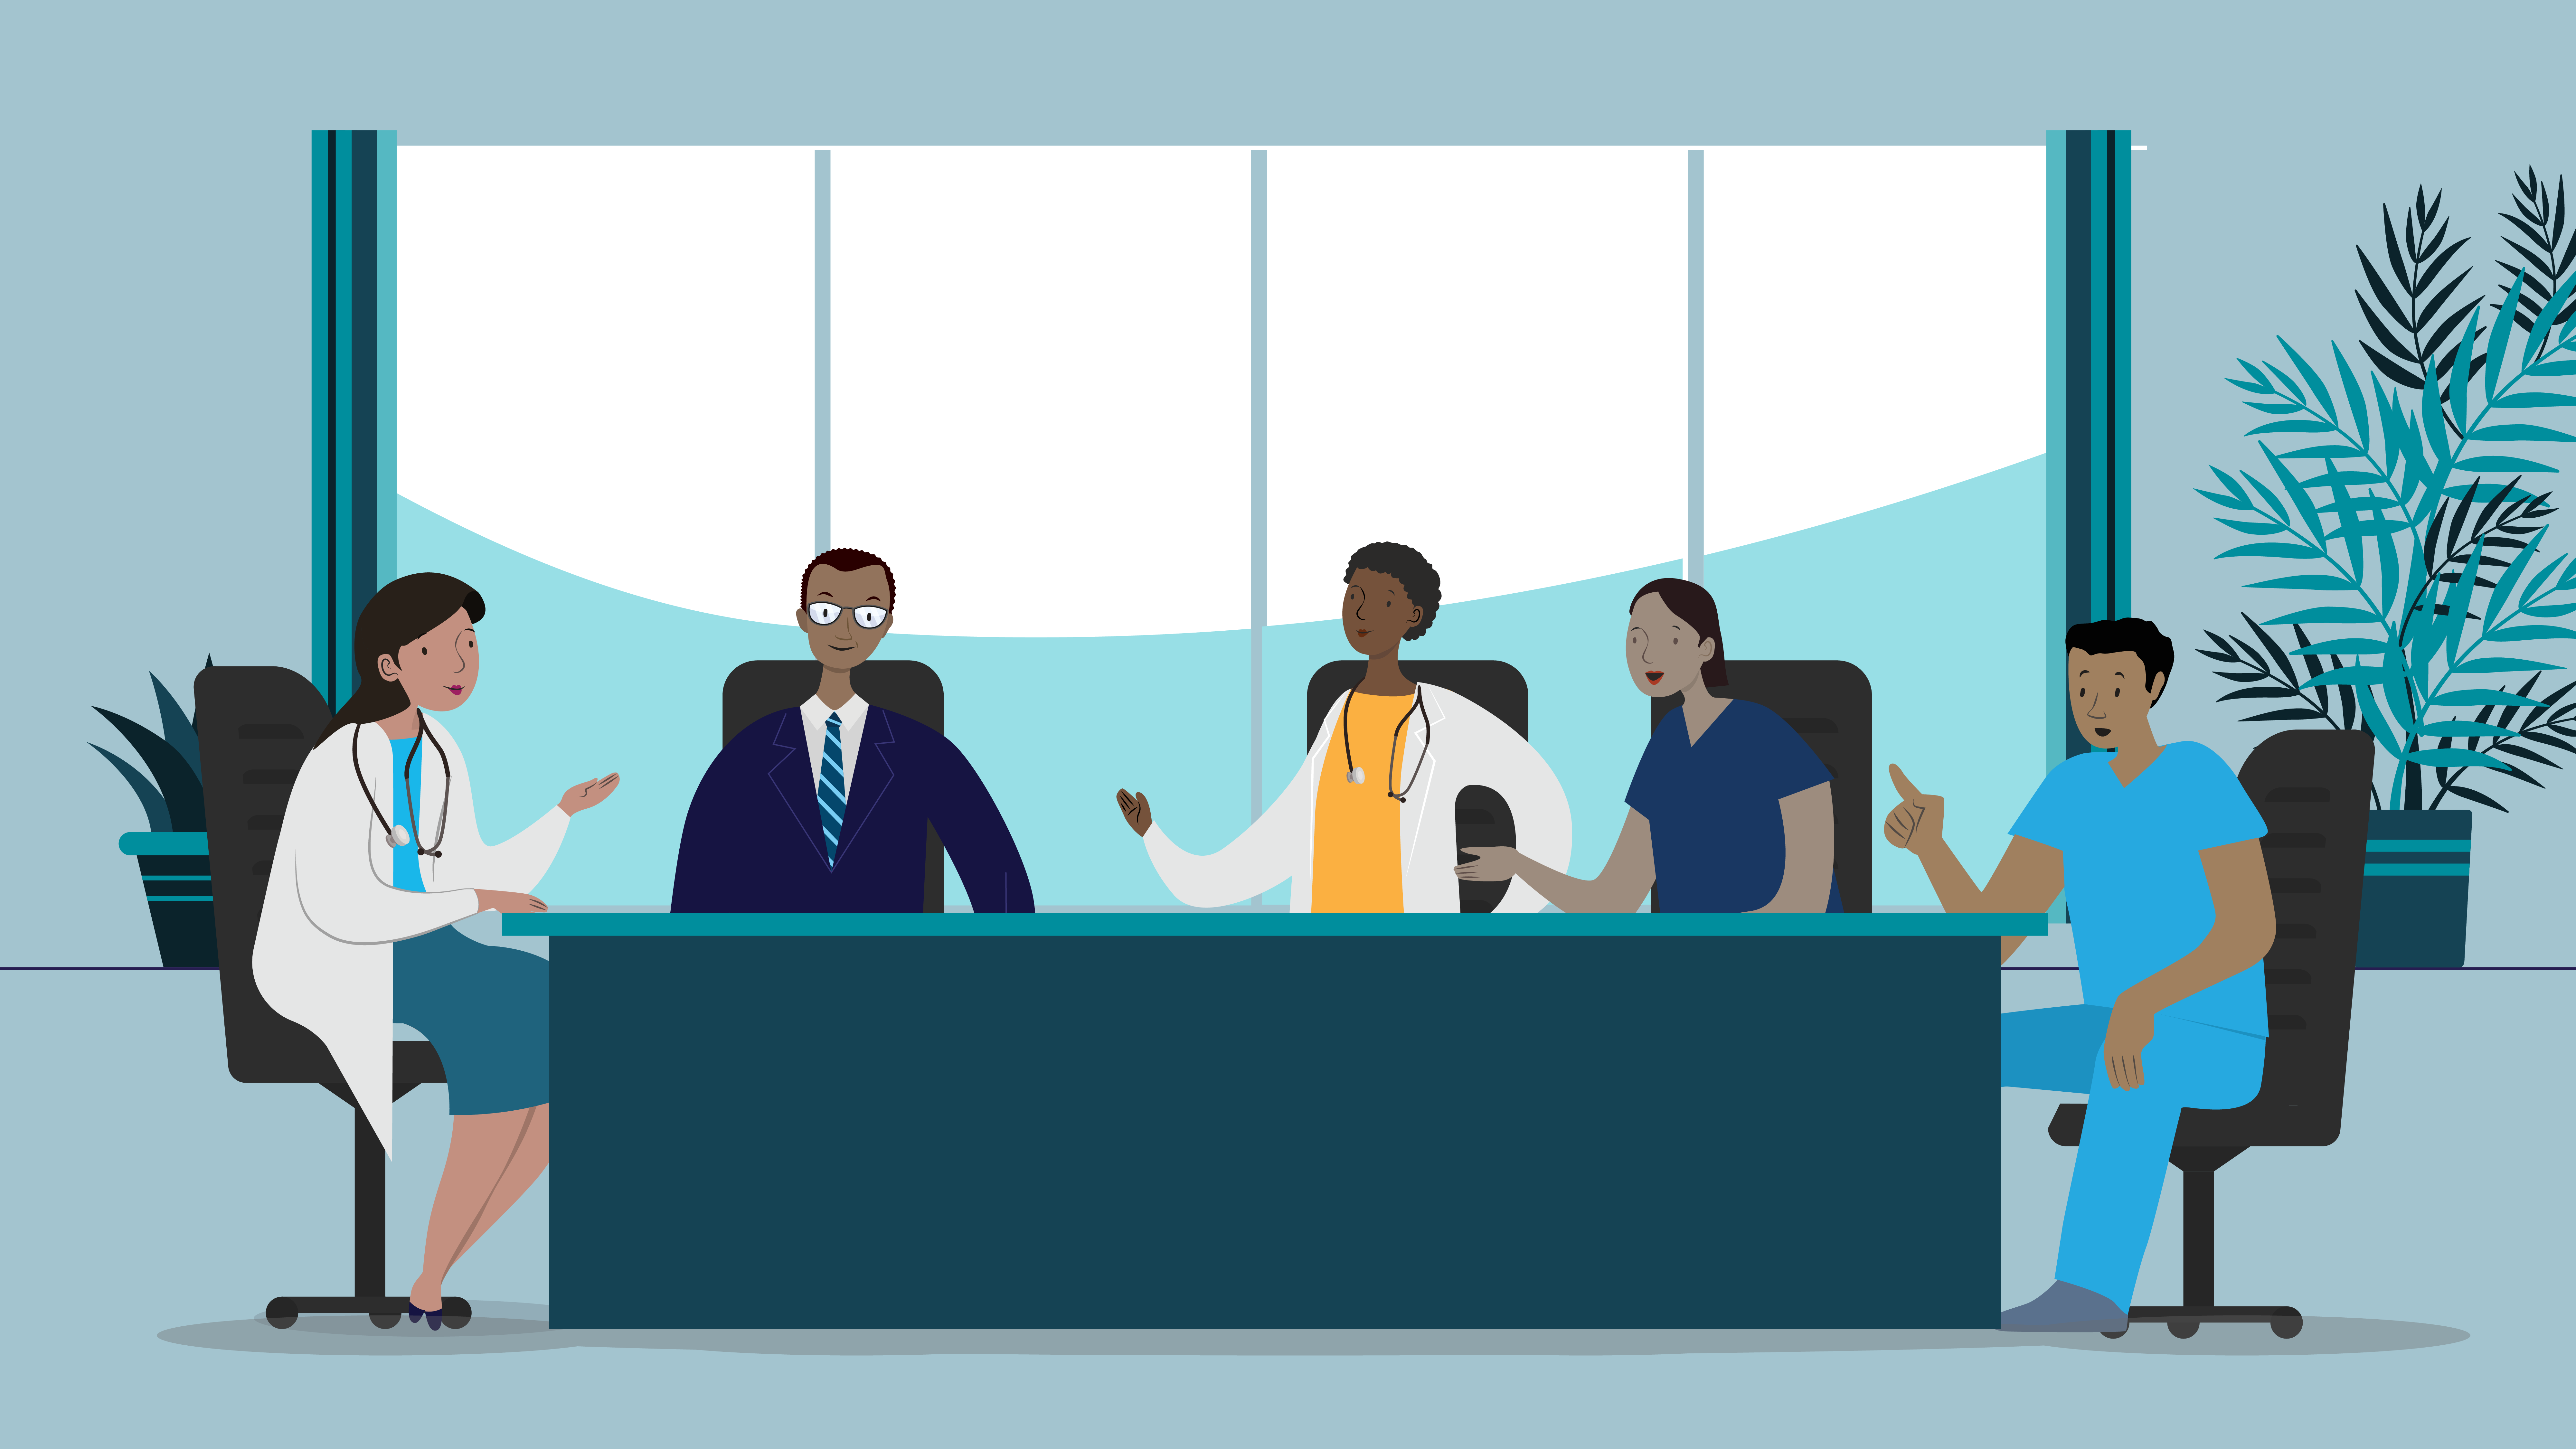 Illustration of healthcare staff in a meeting room